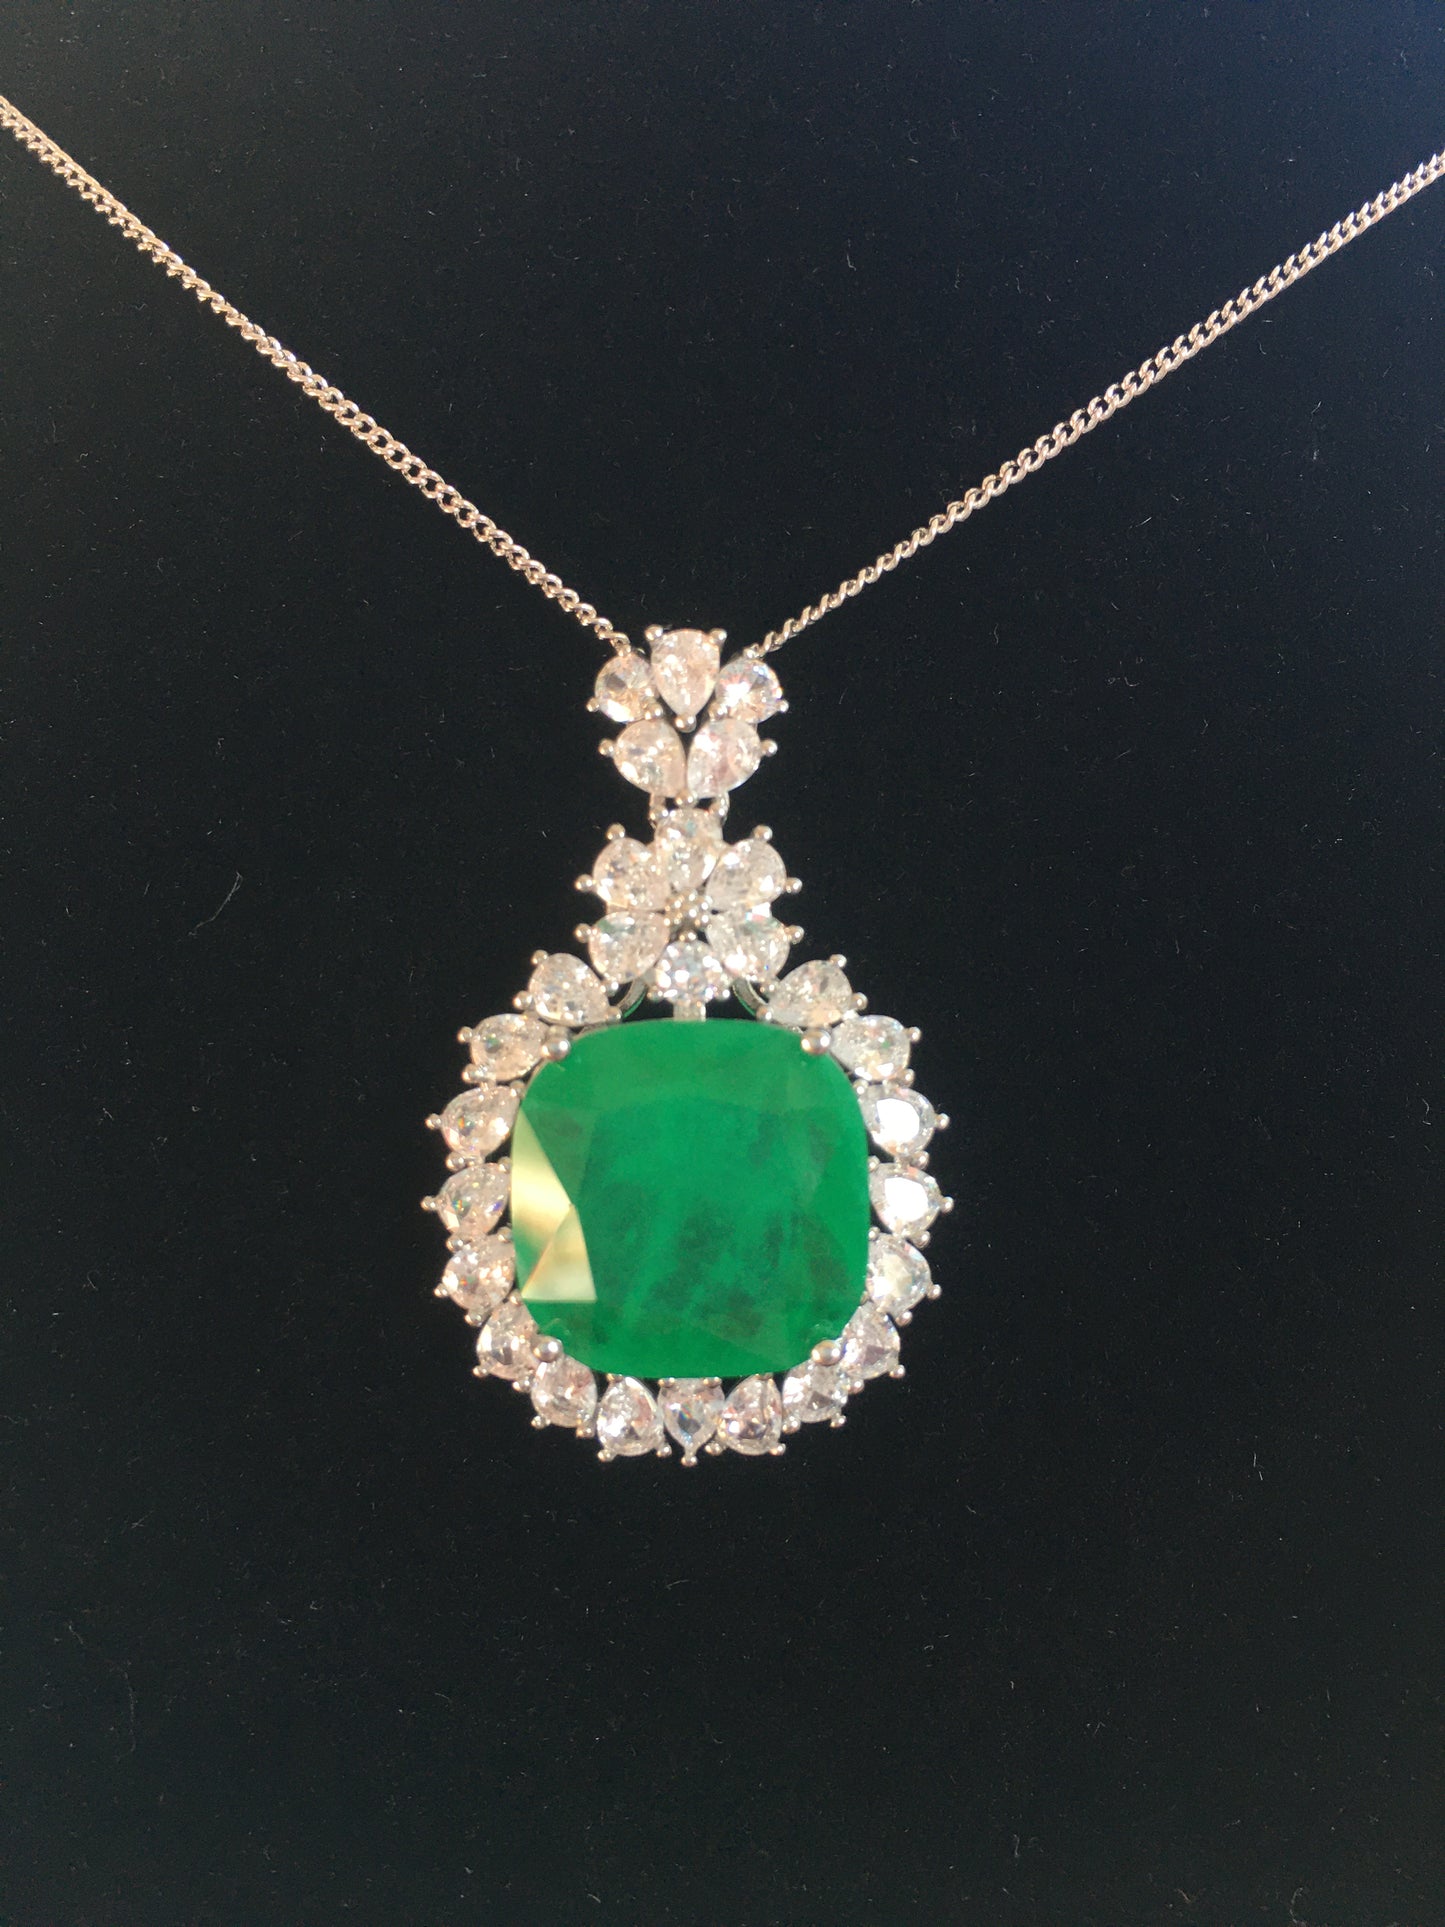 GREEN EMERLAD NECKLACE Magnificent Chandelier Halo Pendant Exotic Vivid Green Glow Color Earring MAY Birthstone 18K White Gold Plated